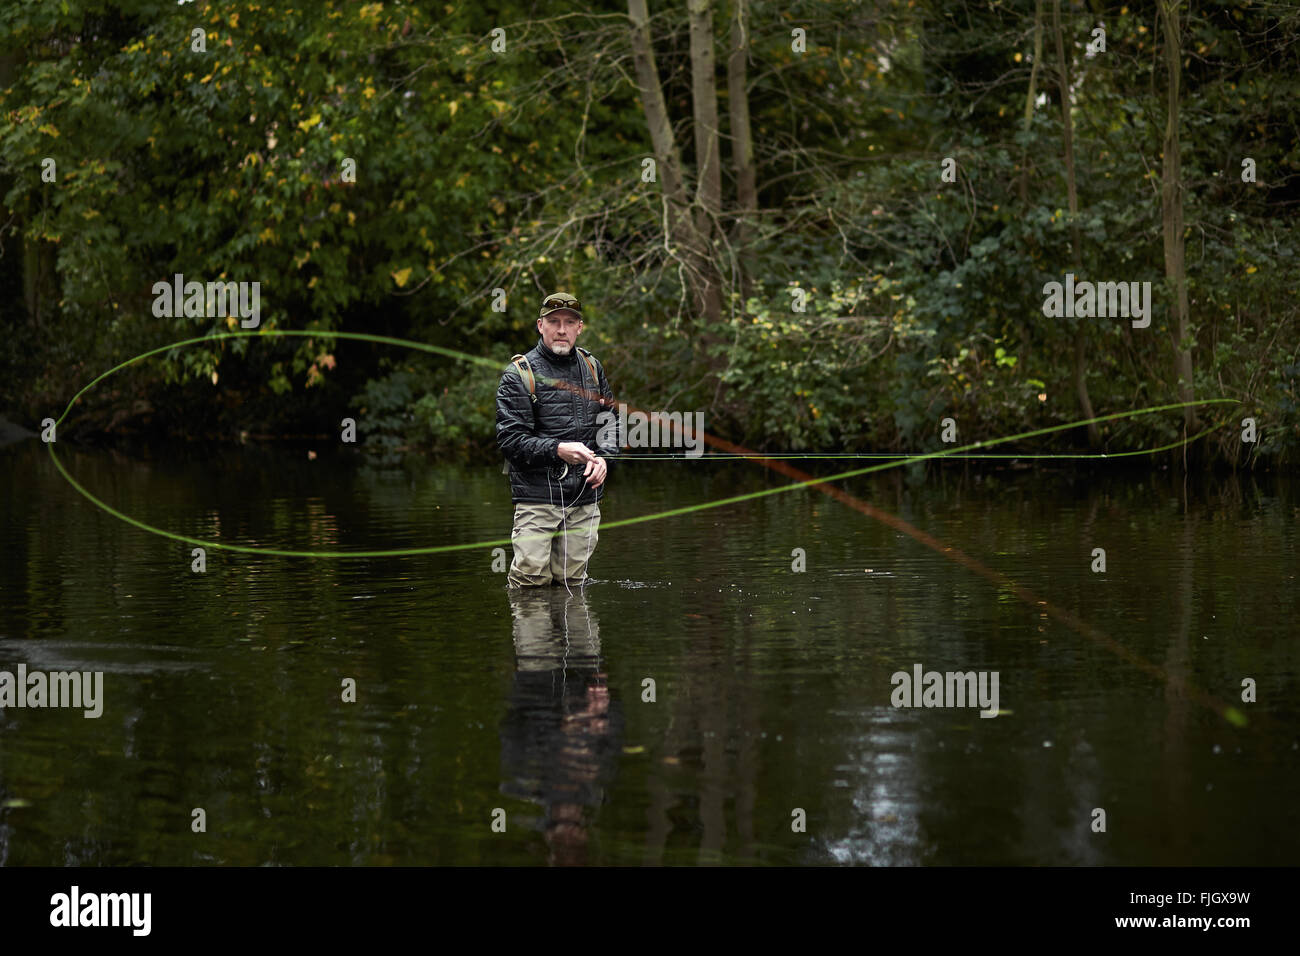 A man fly fishing in a river - London, UK Stock Photo